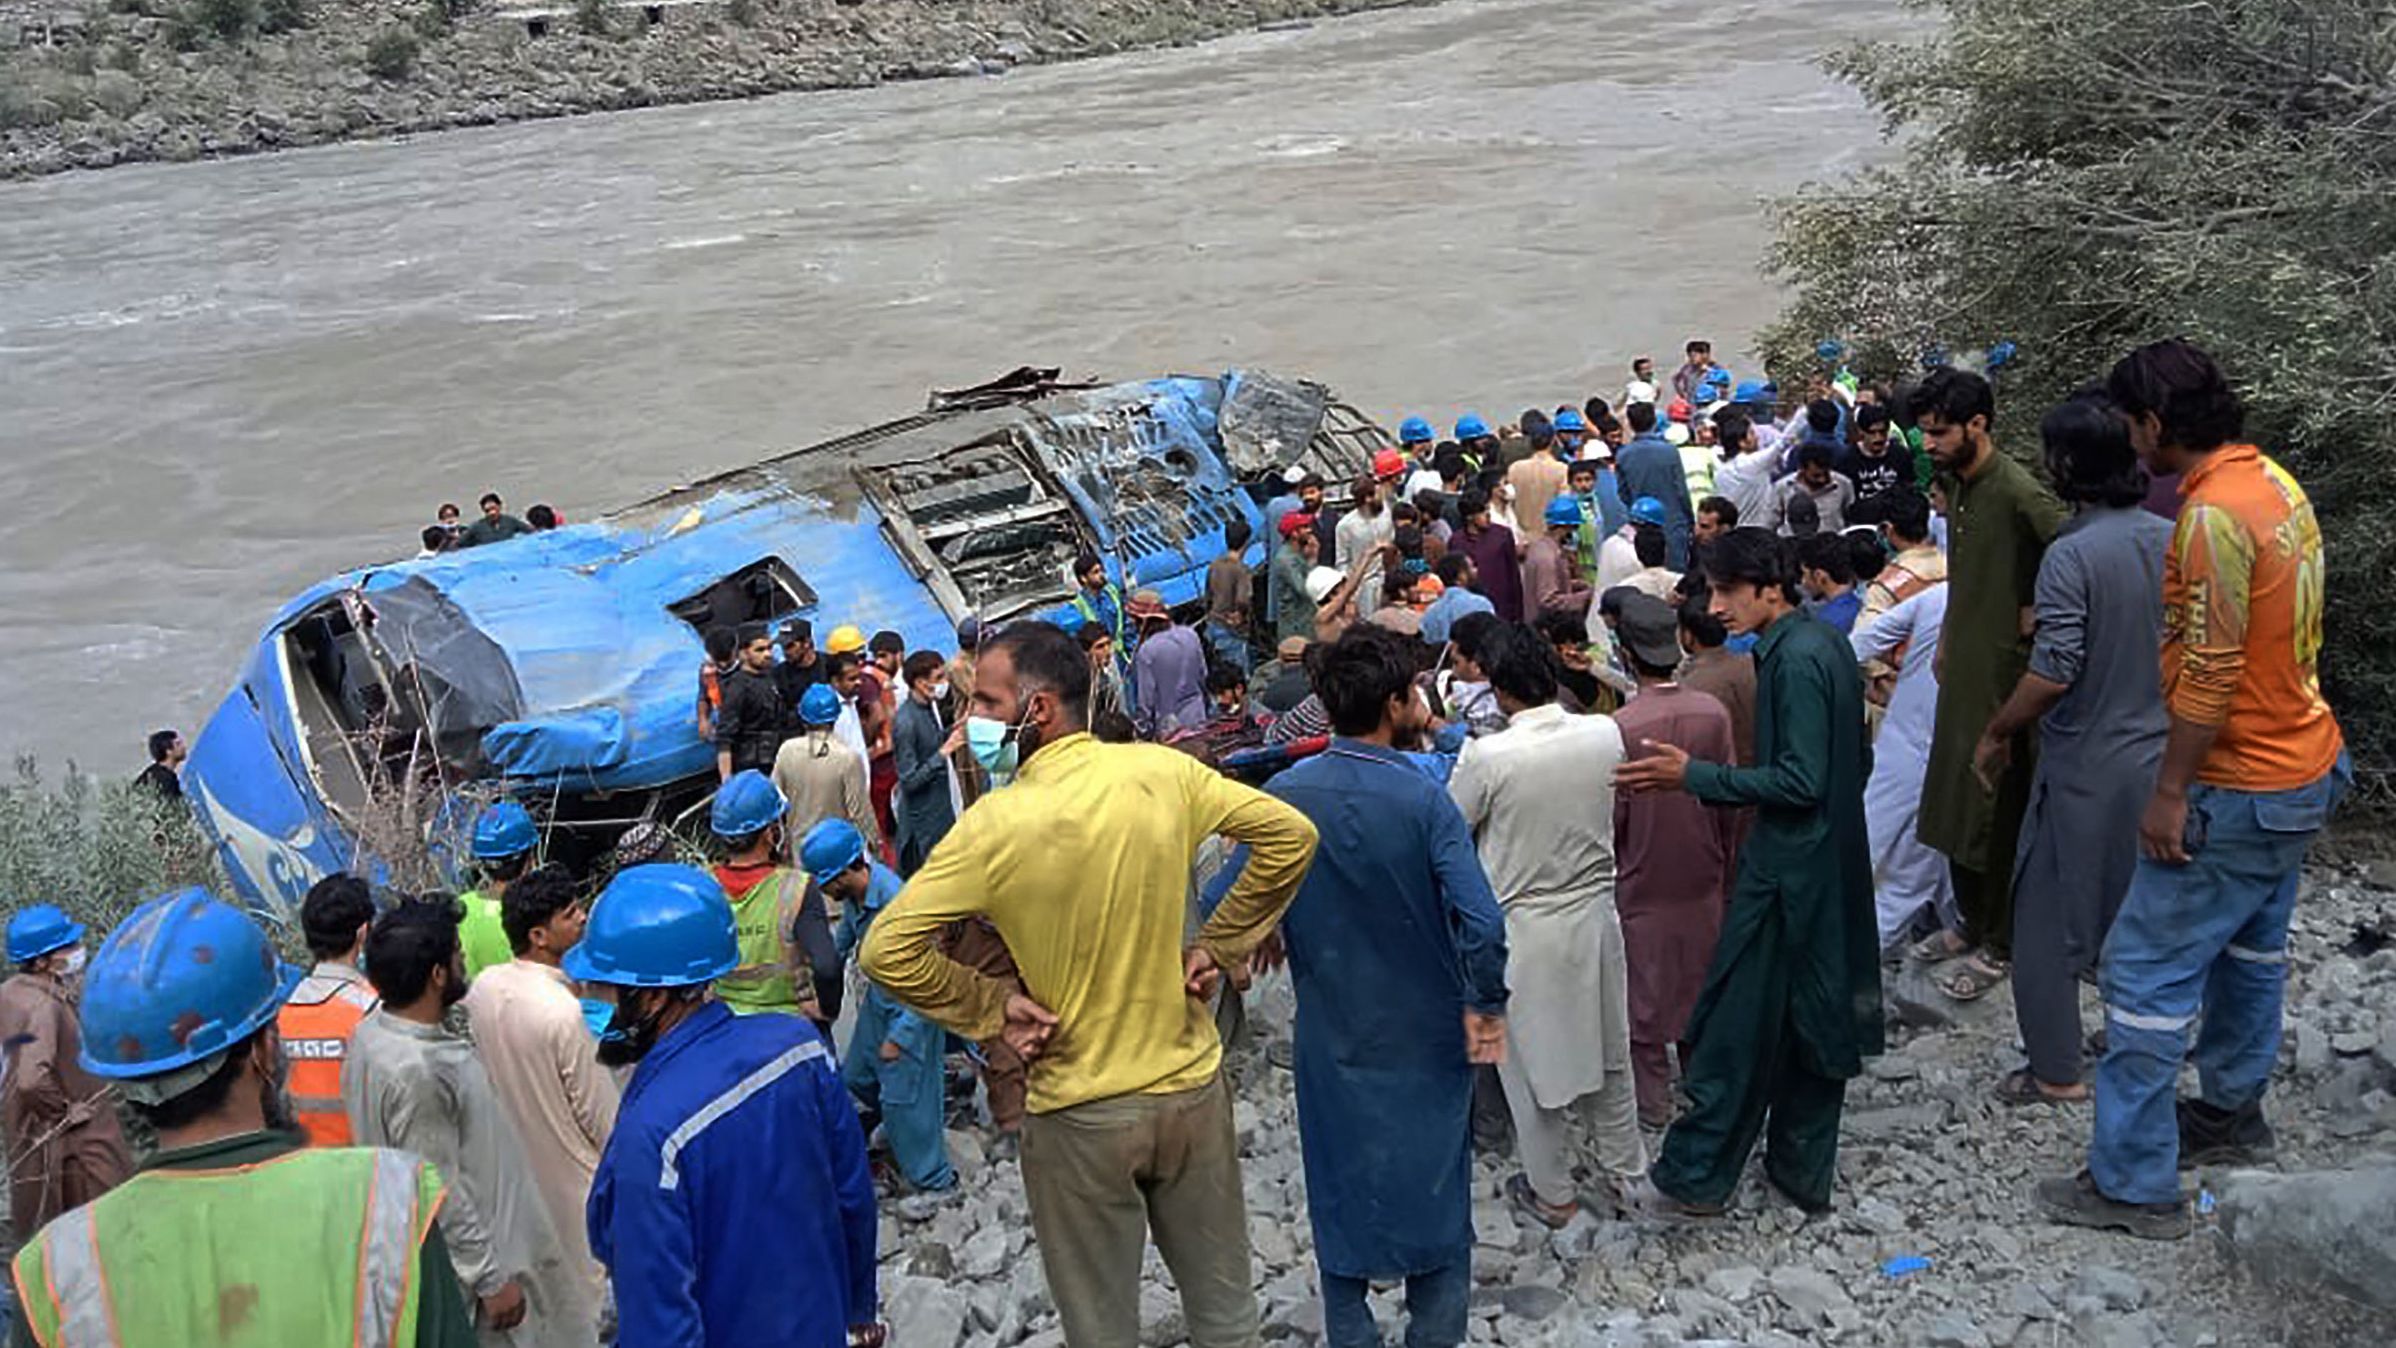 Rescue workers and onlookers gather around a wreck after a bus plunged into a ravine following an explosion in Pakistan on July 14.